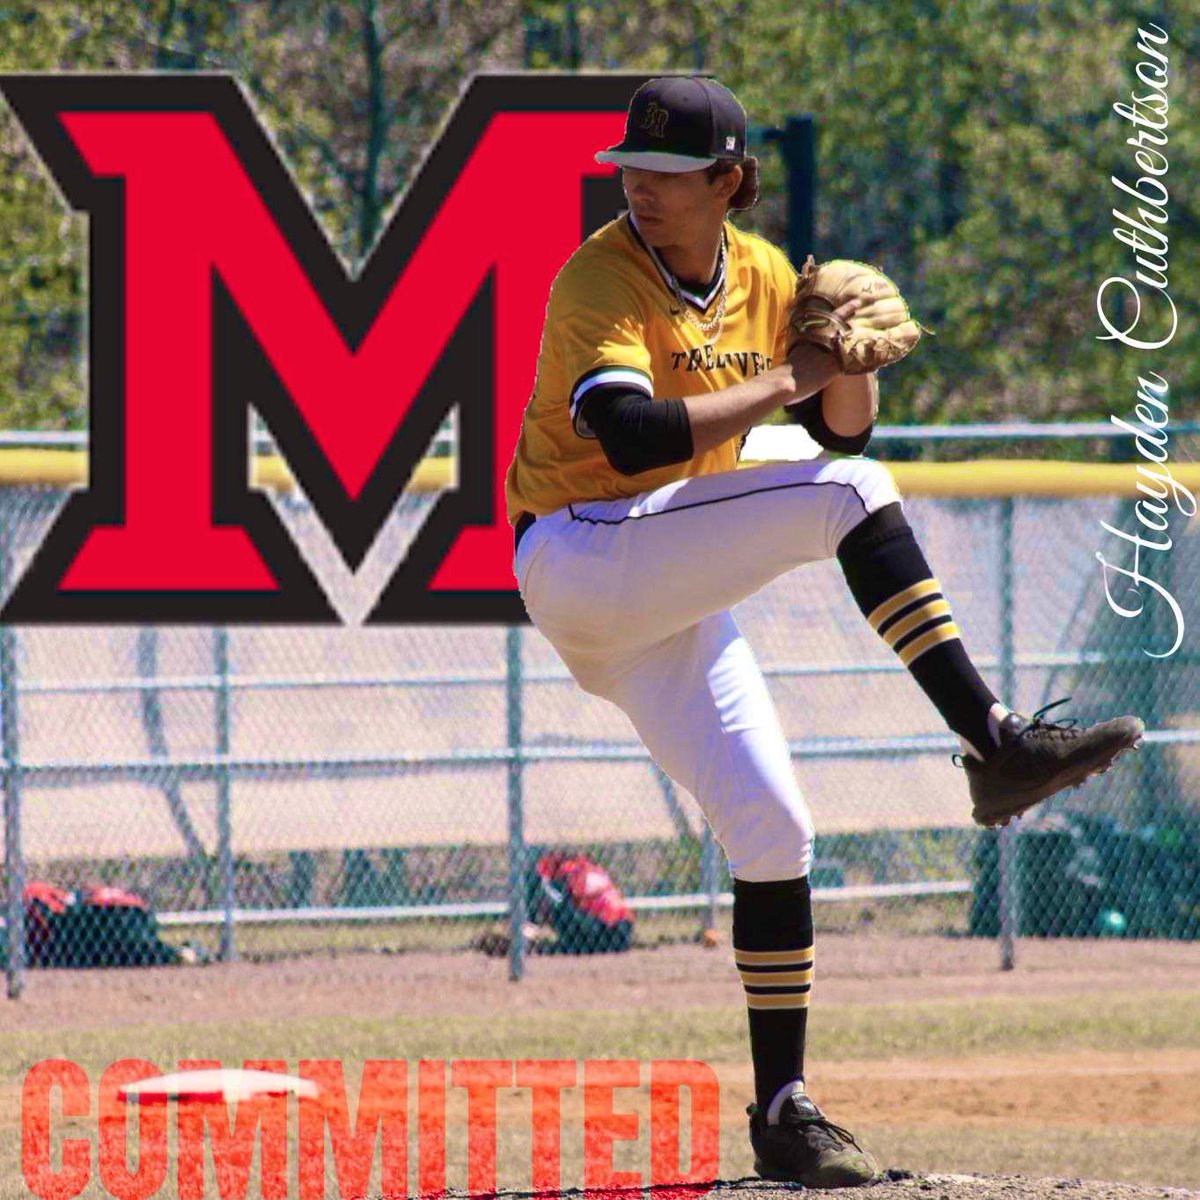 Excited to announce I have committed to @MiamiOHBaseball! I am extremely blessed to be given this opportunity and ready to be a Redhawk! I’d also like to thank everyone who has helped along the way